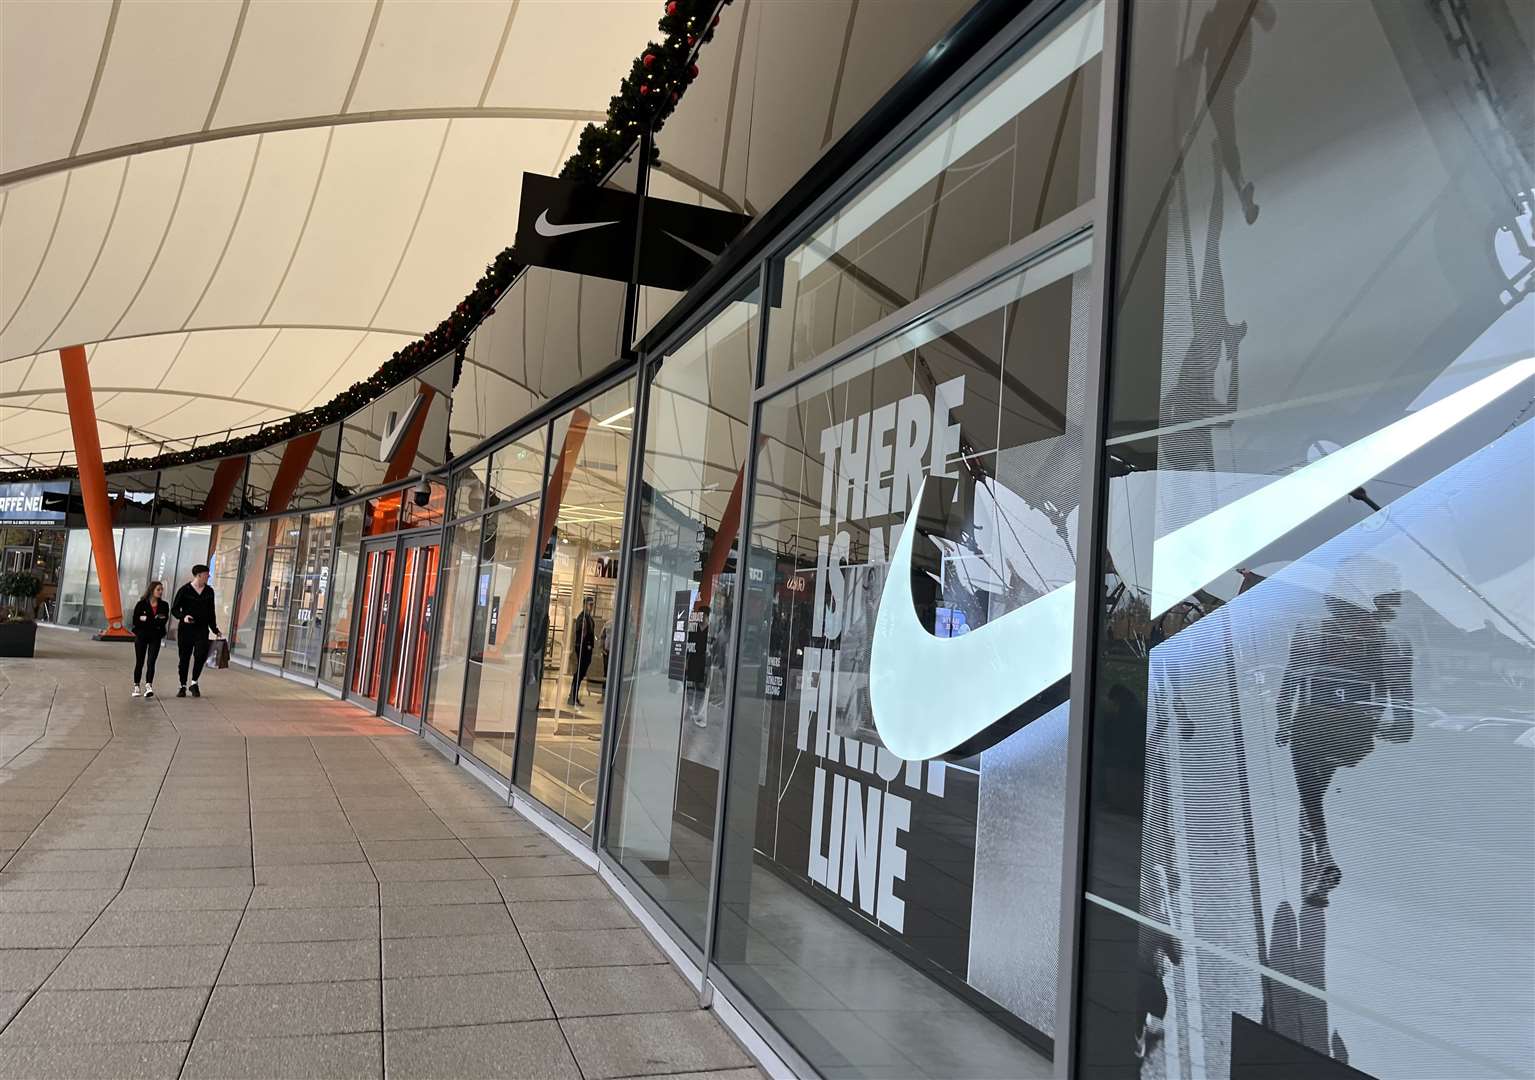 The Nike store will reopen on Monday